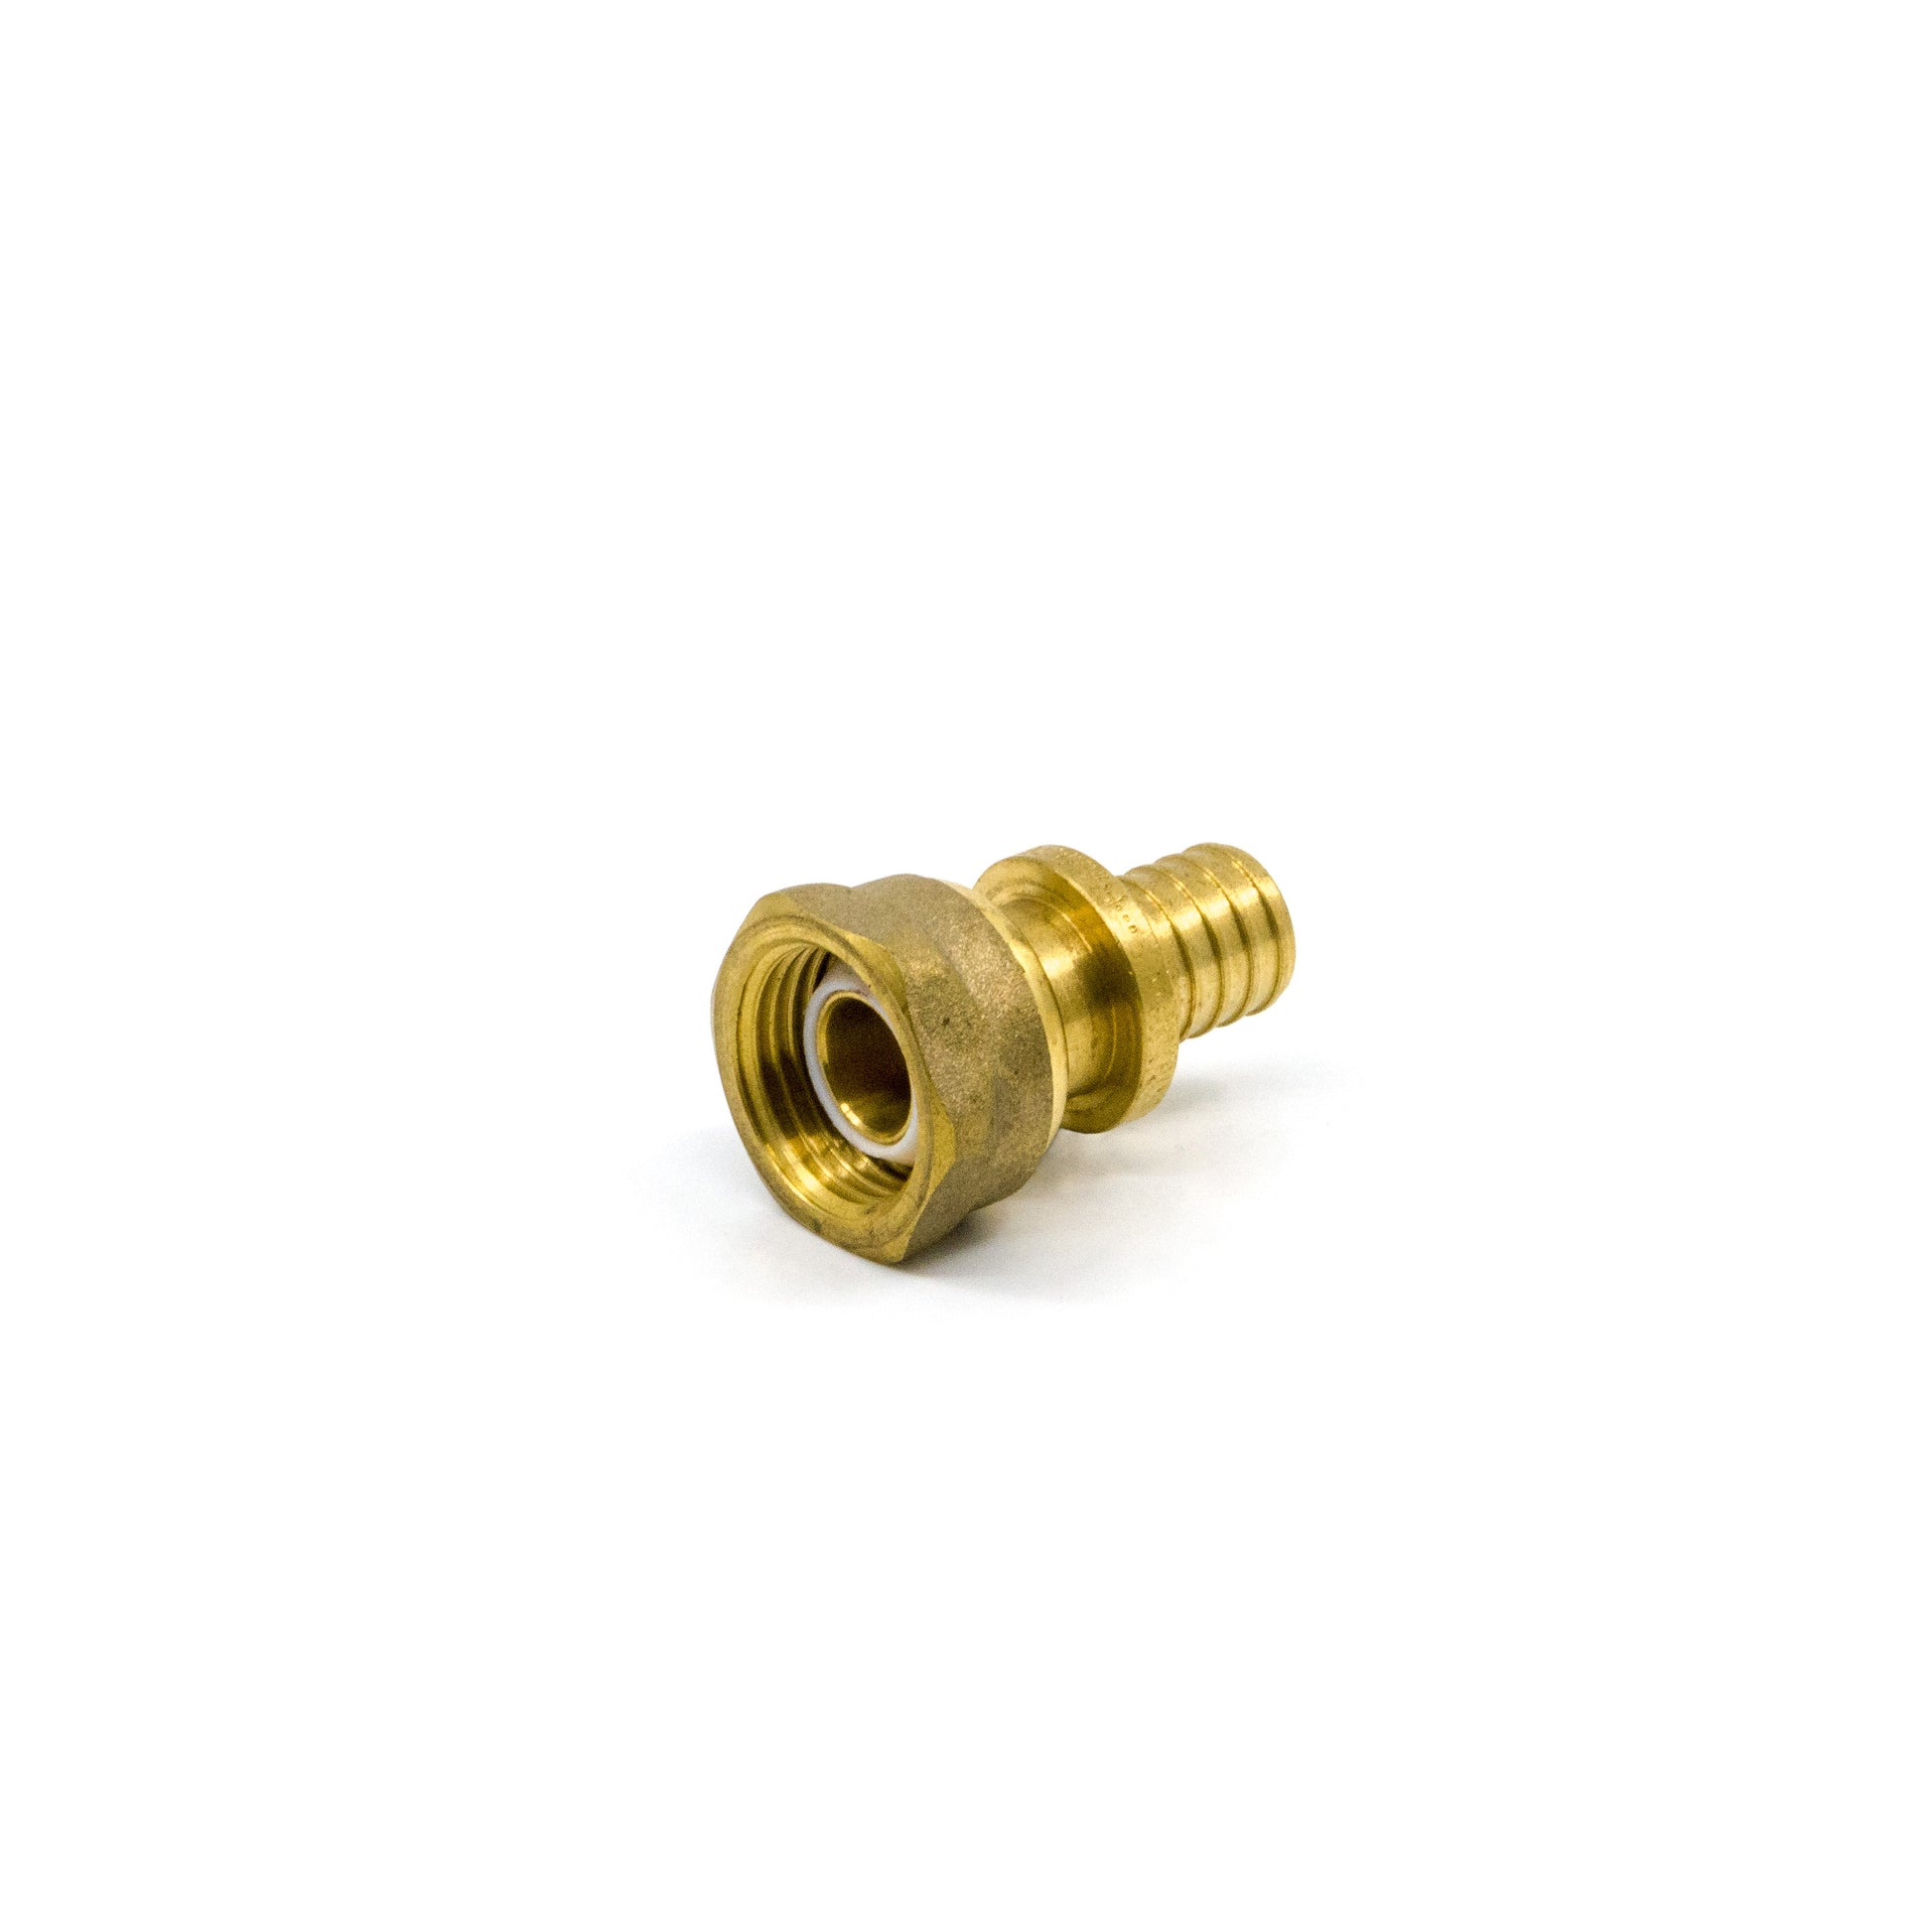 Forza Pex Female Tap Connector 16mm X 1/2"